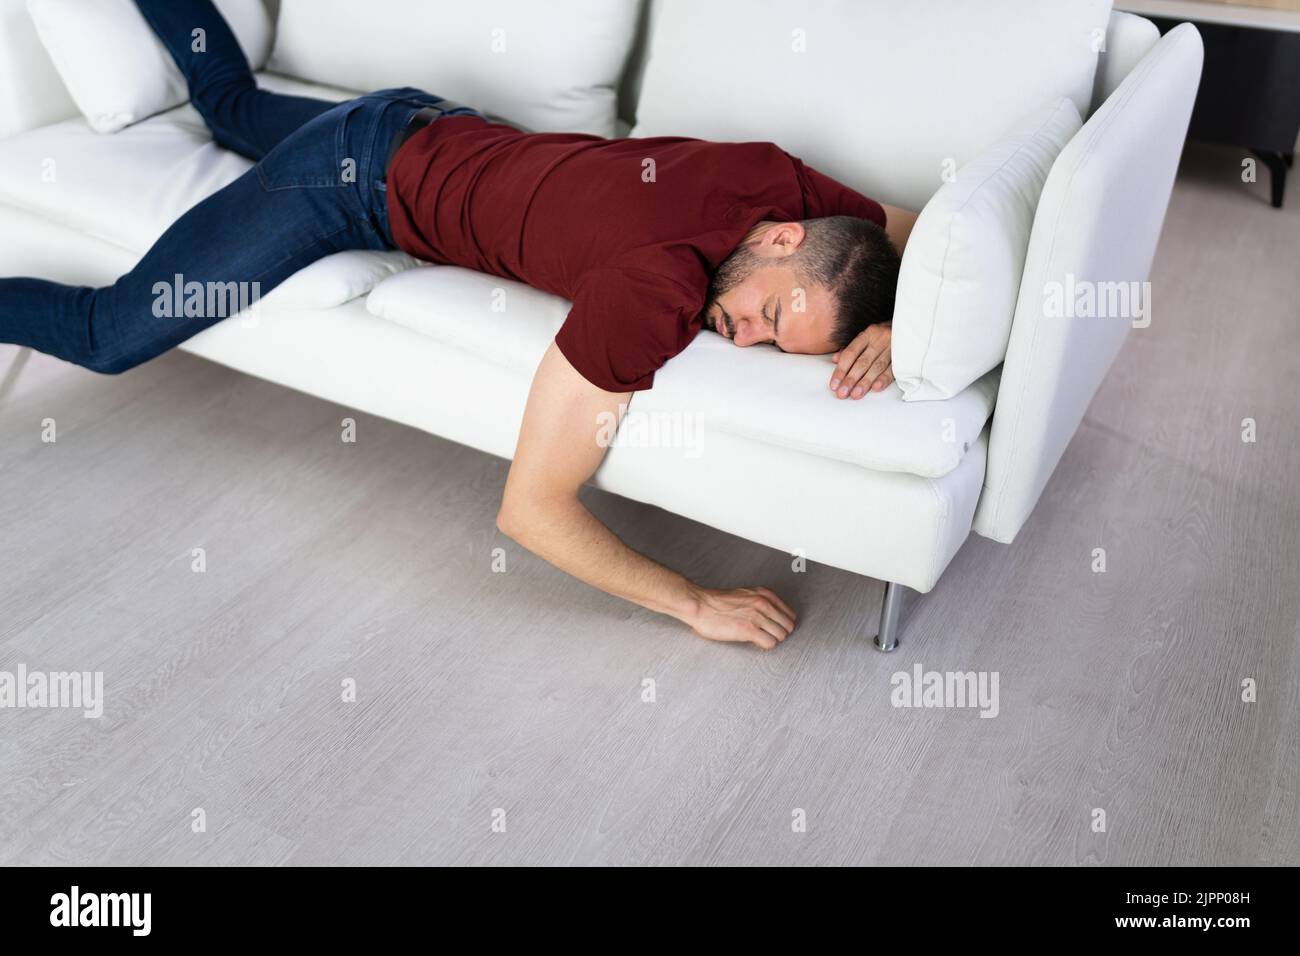 Man With Lethargy And Fatigue On Couch Or Sofa Stock Photo